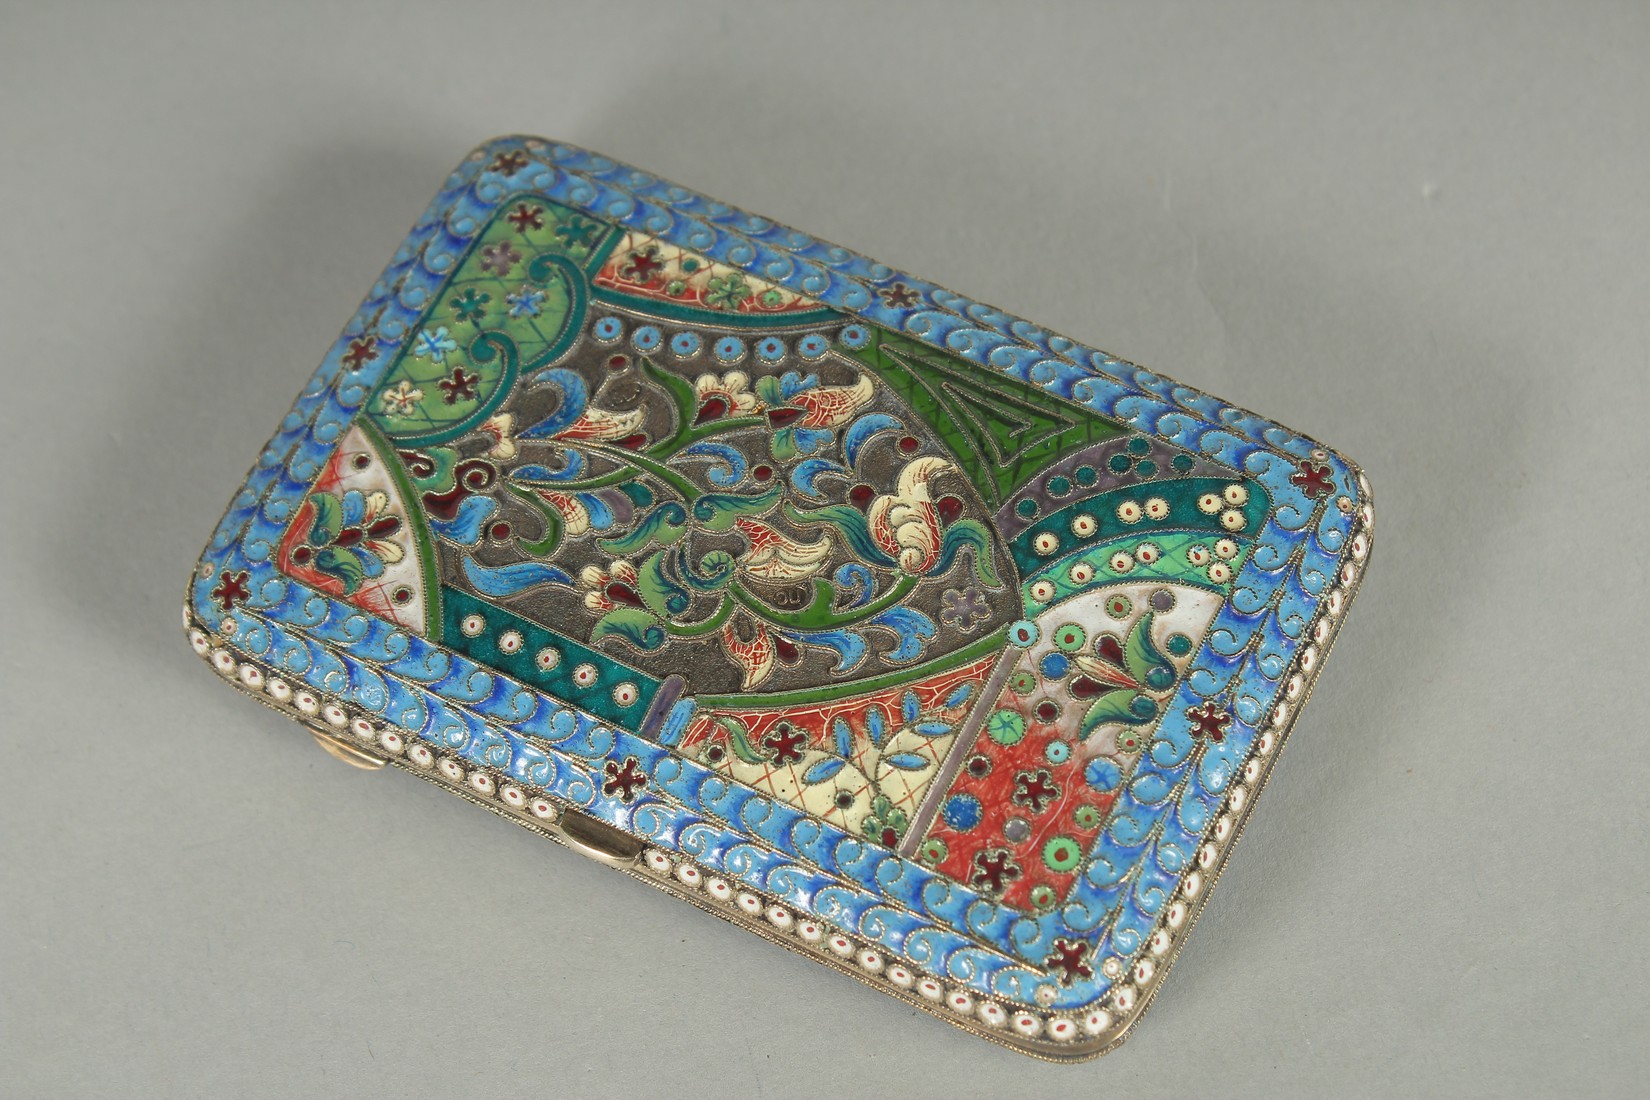 A RUSSIAN SILVER AND ENAMEL CIGARETTE CASE. 10cm x 6.5cm Weight: 119gms. - Image 2 of 4